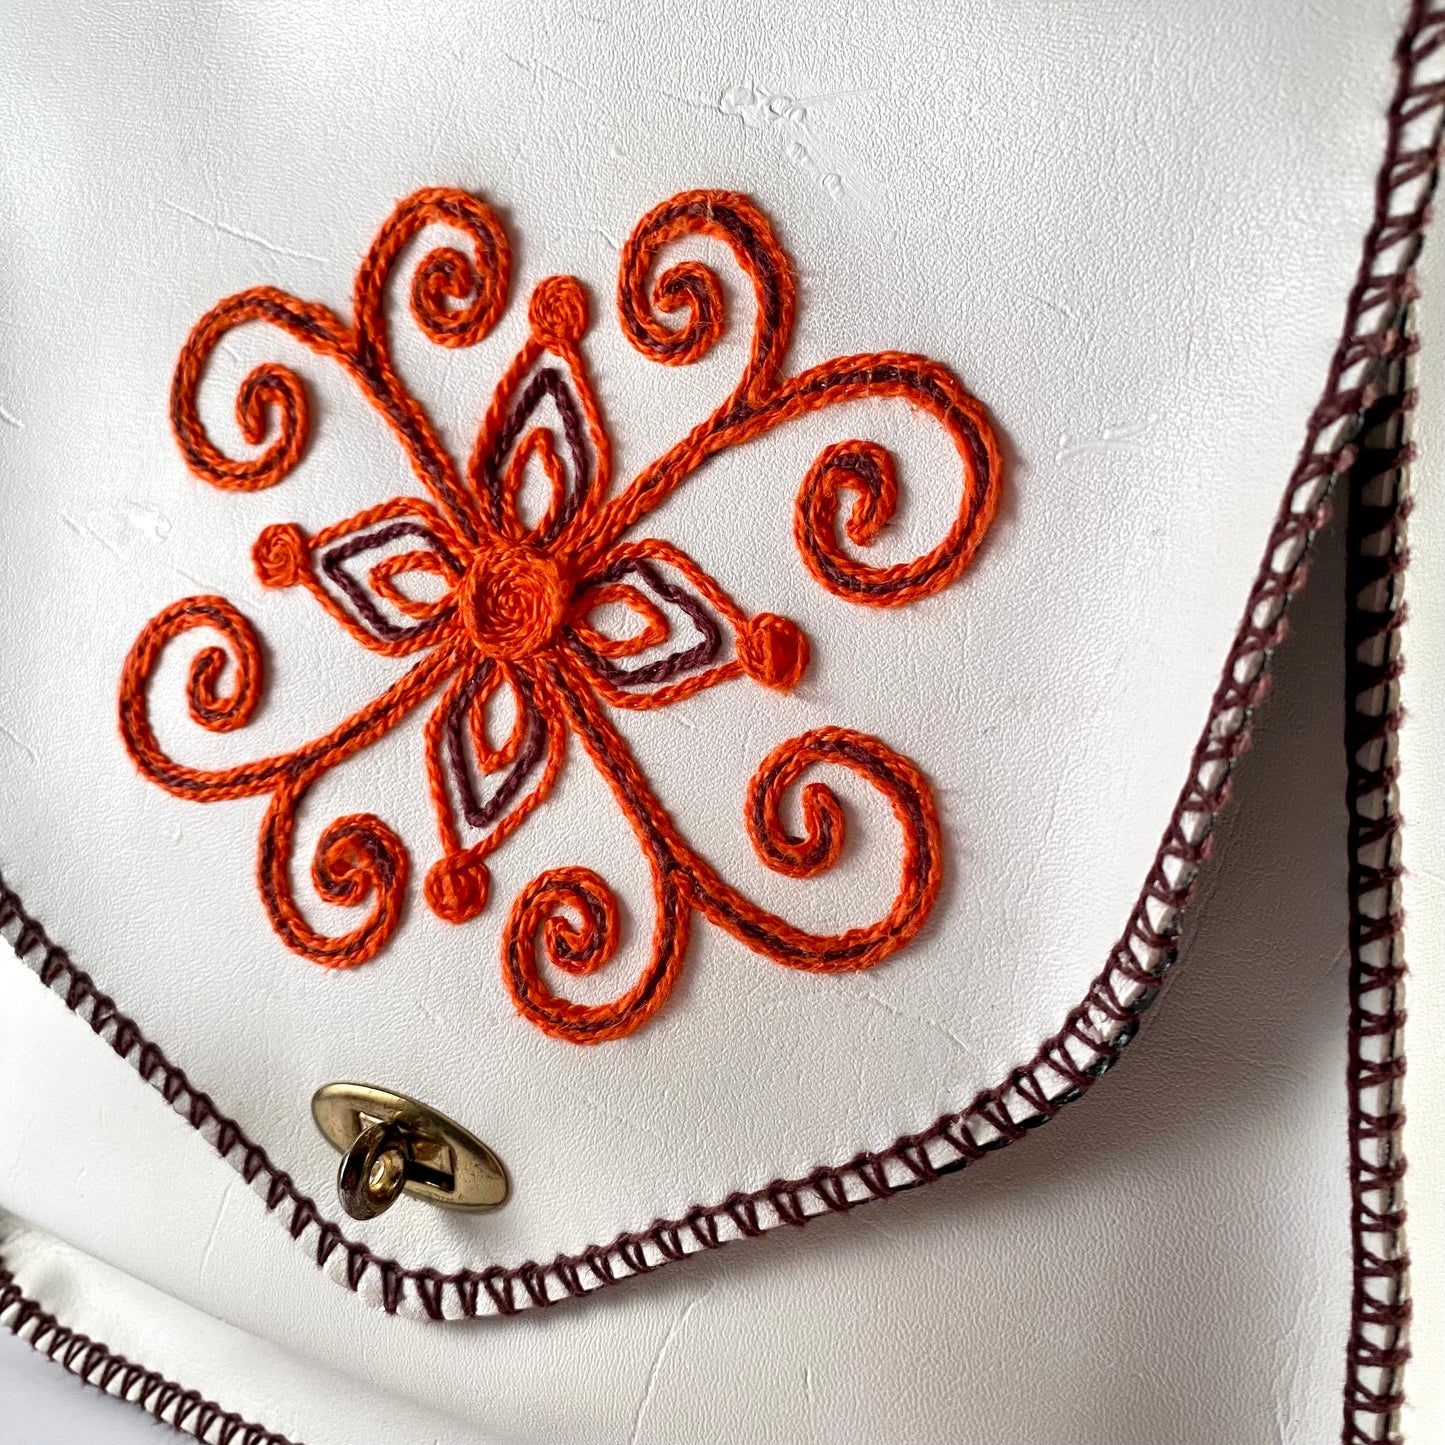 Late 60s/ Early 70s Embroidery Embellished Handbag